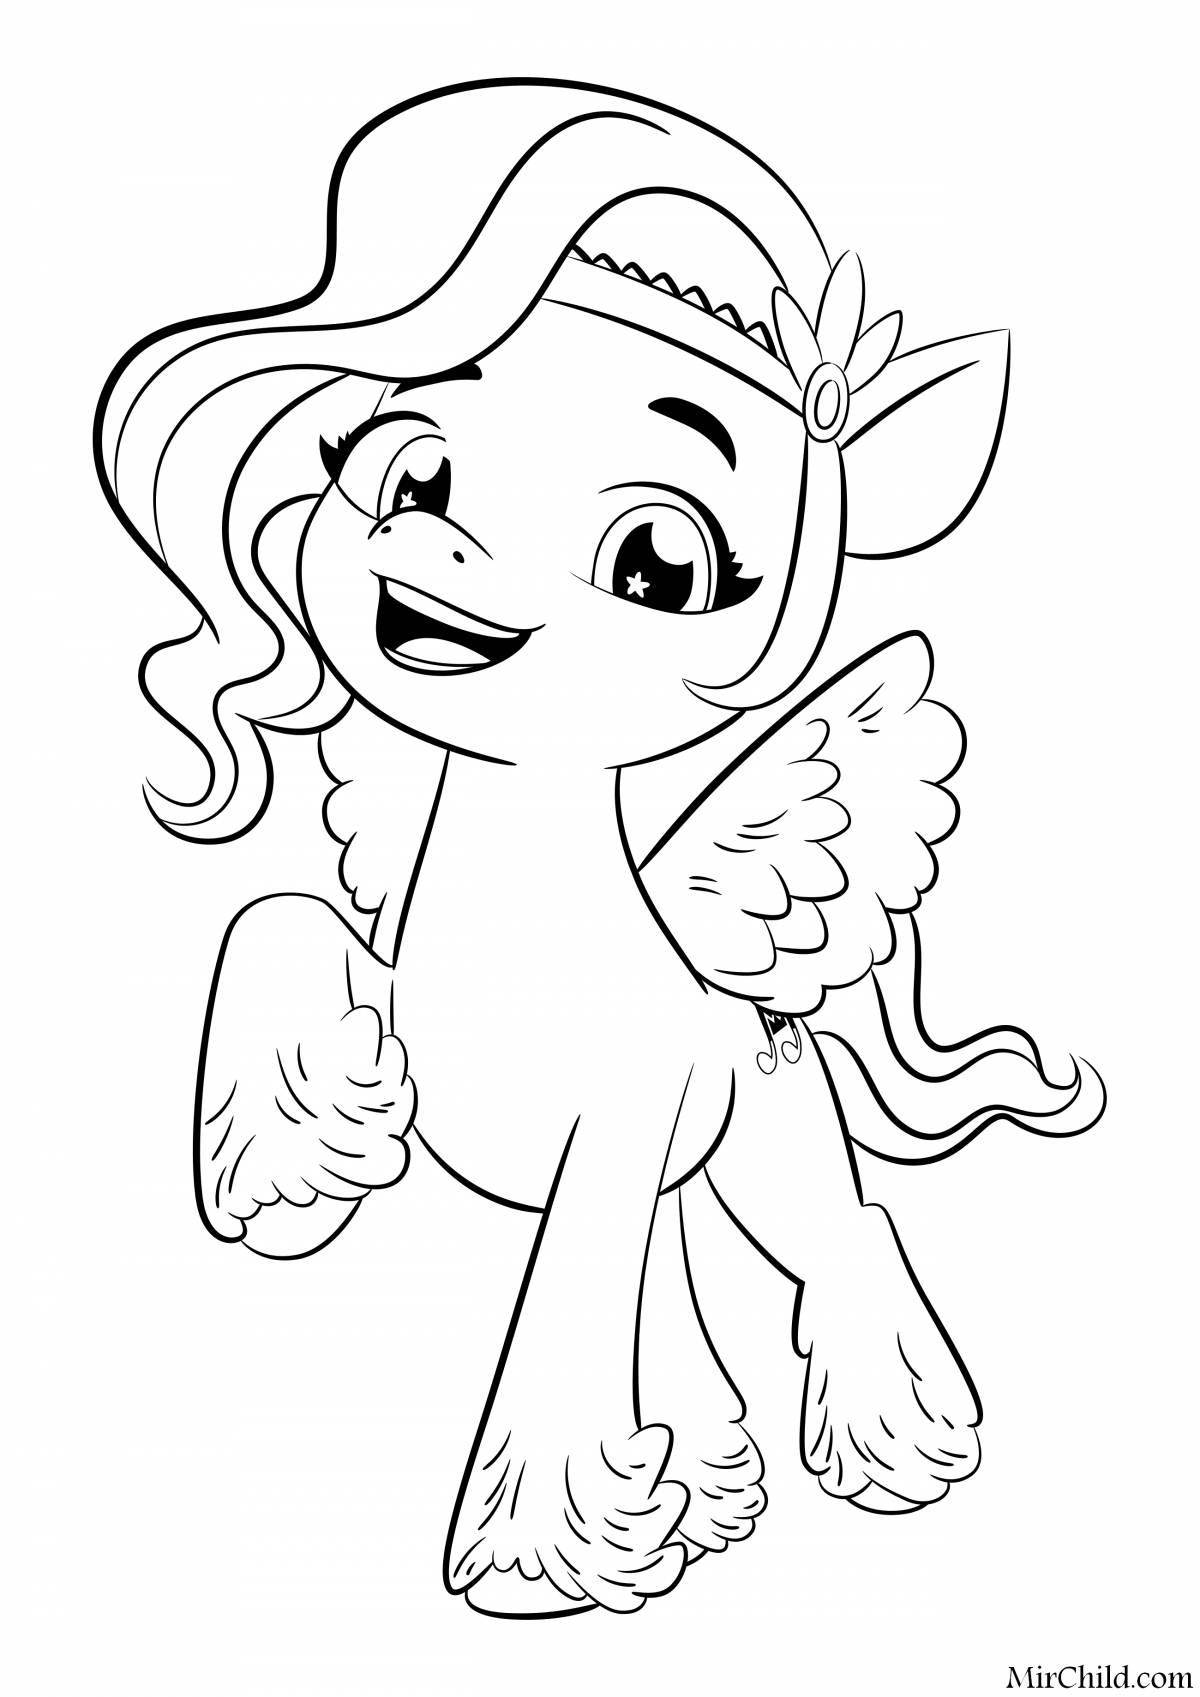 Izzy pony coloring page